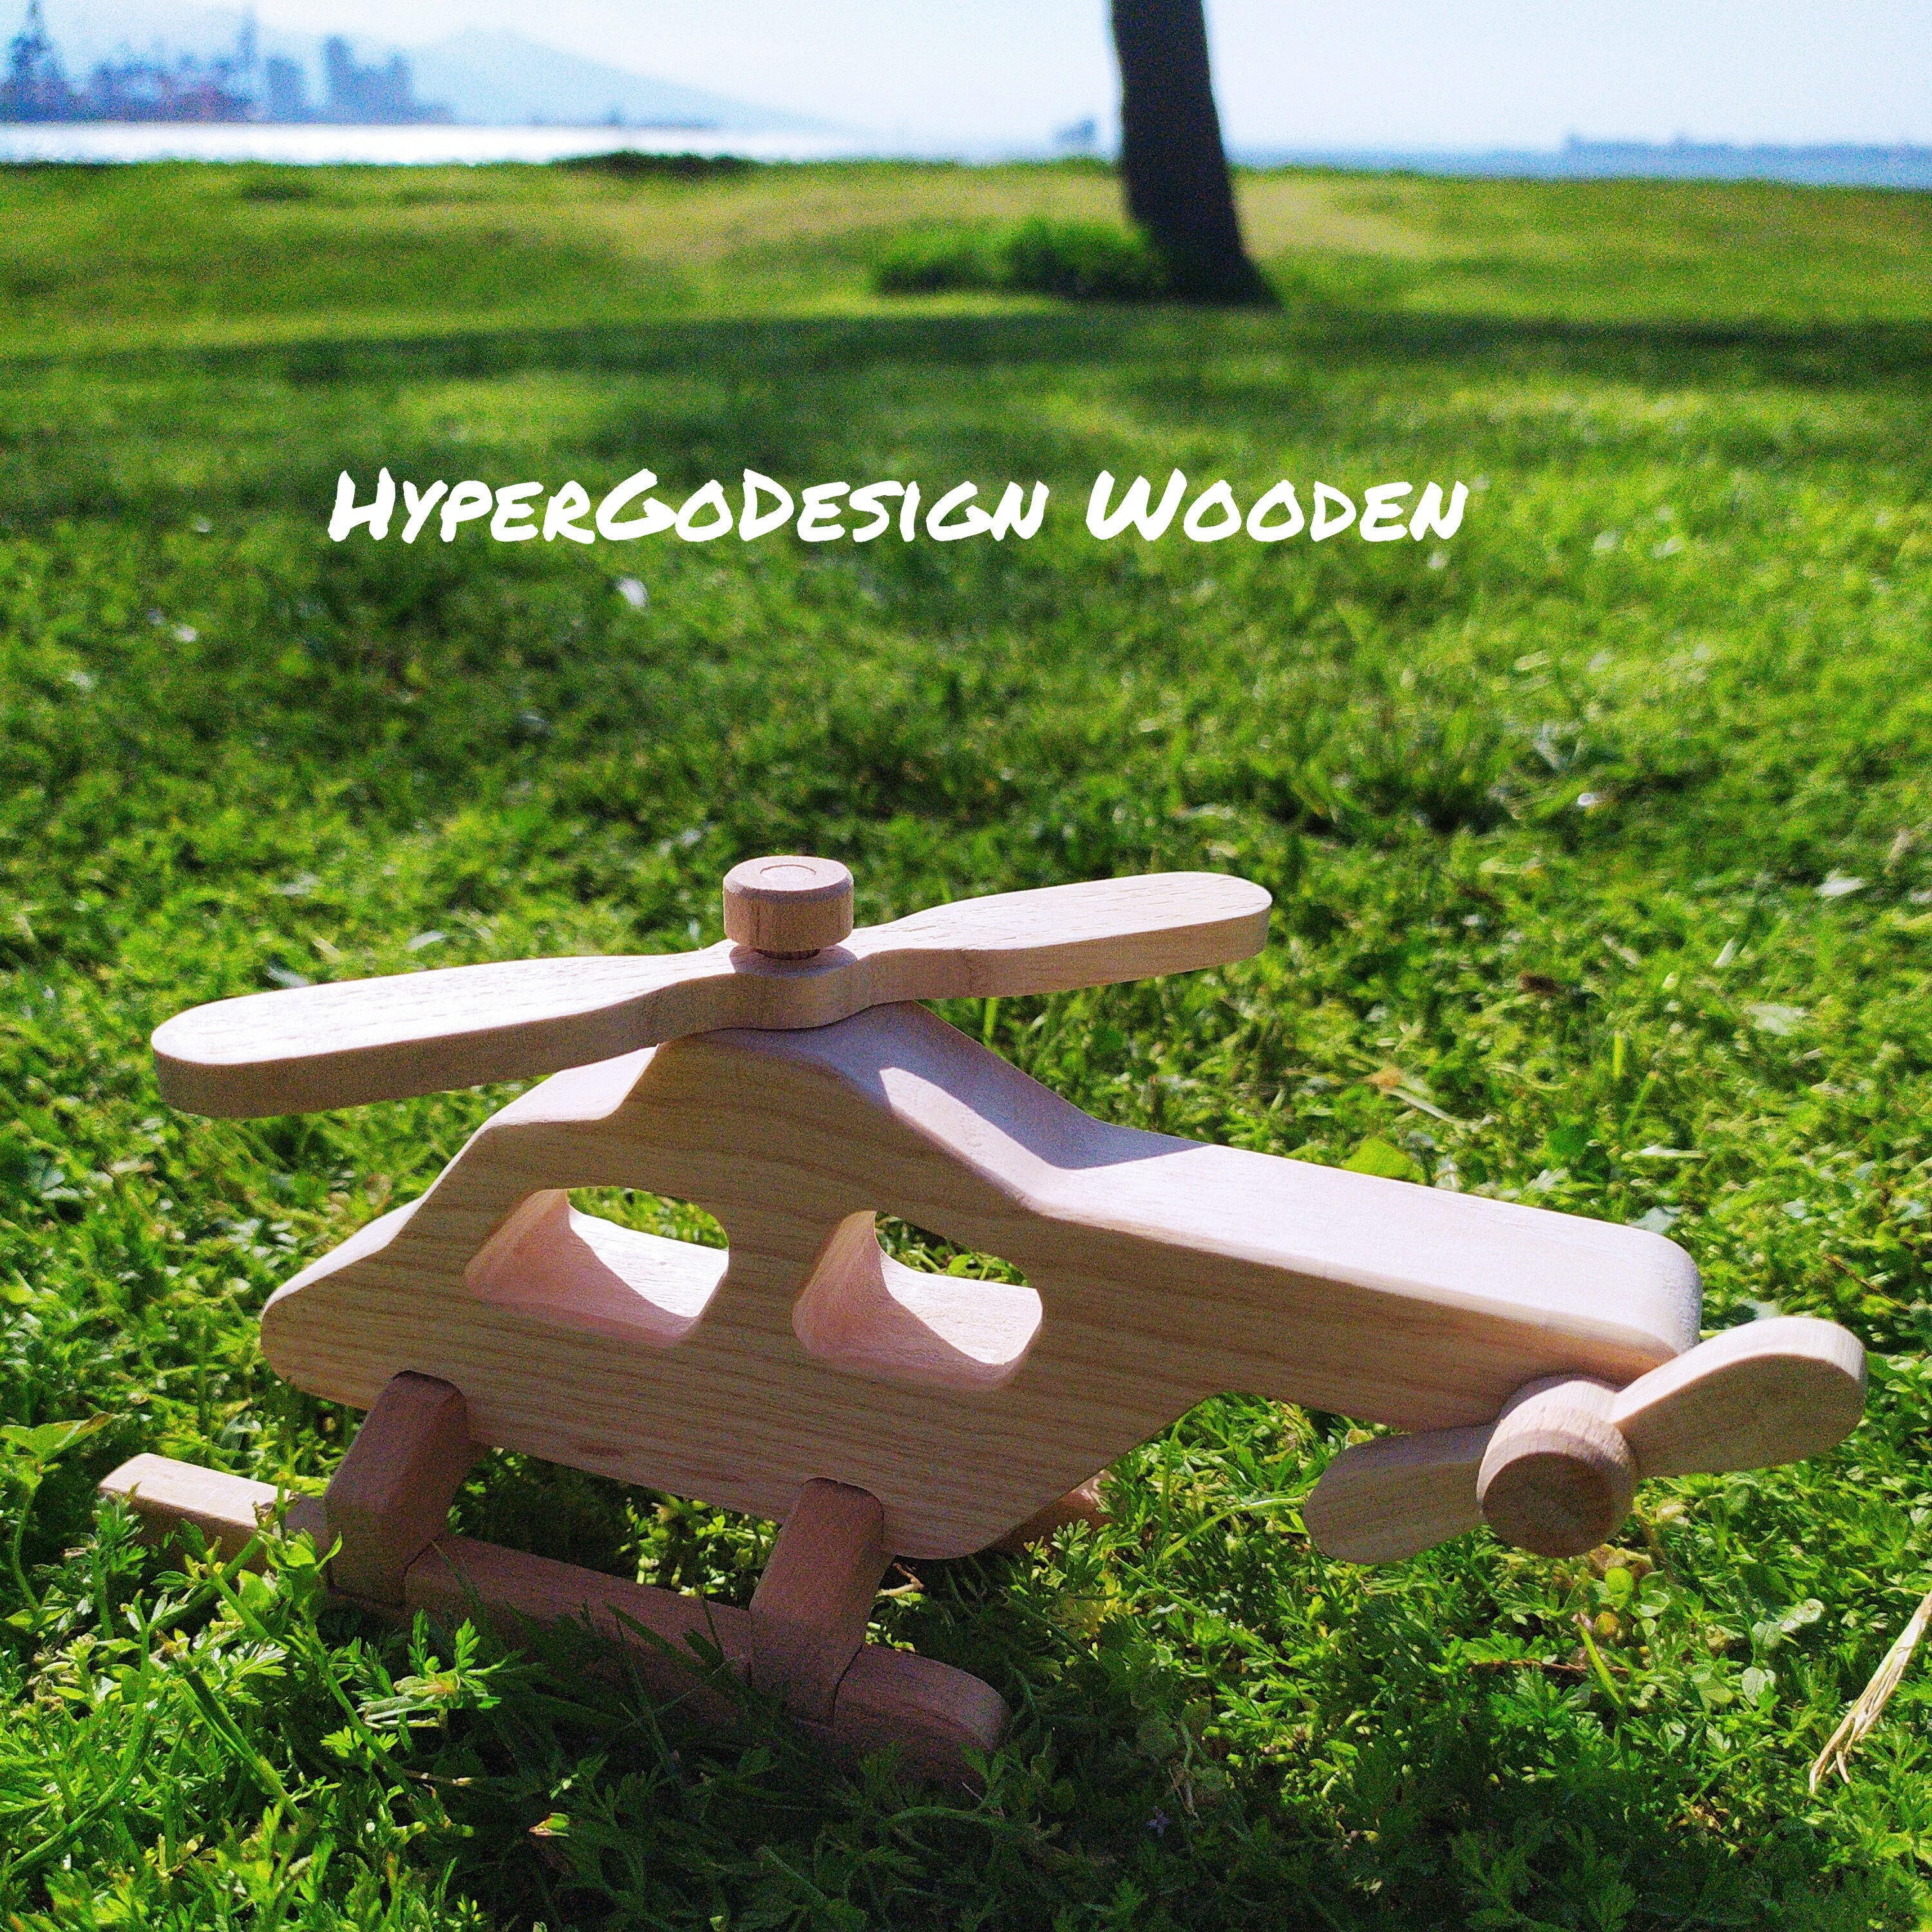 Handmade Helicopter Toy Aviation Delight for Kids: Thoughtfully